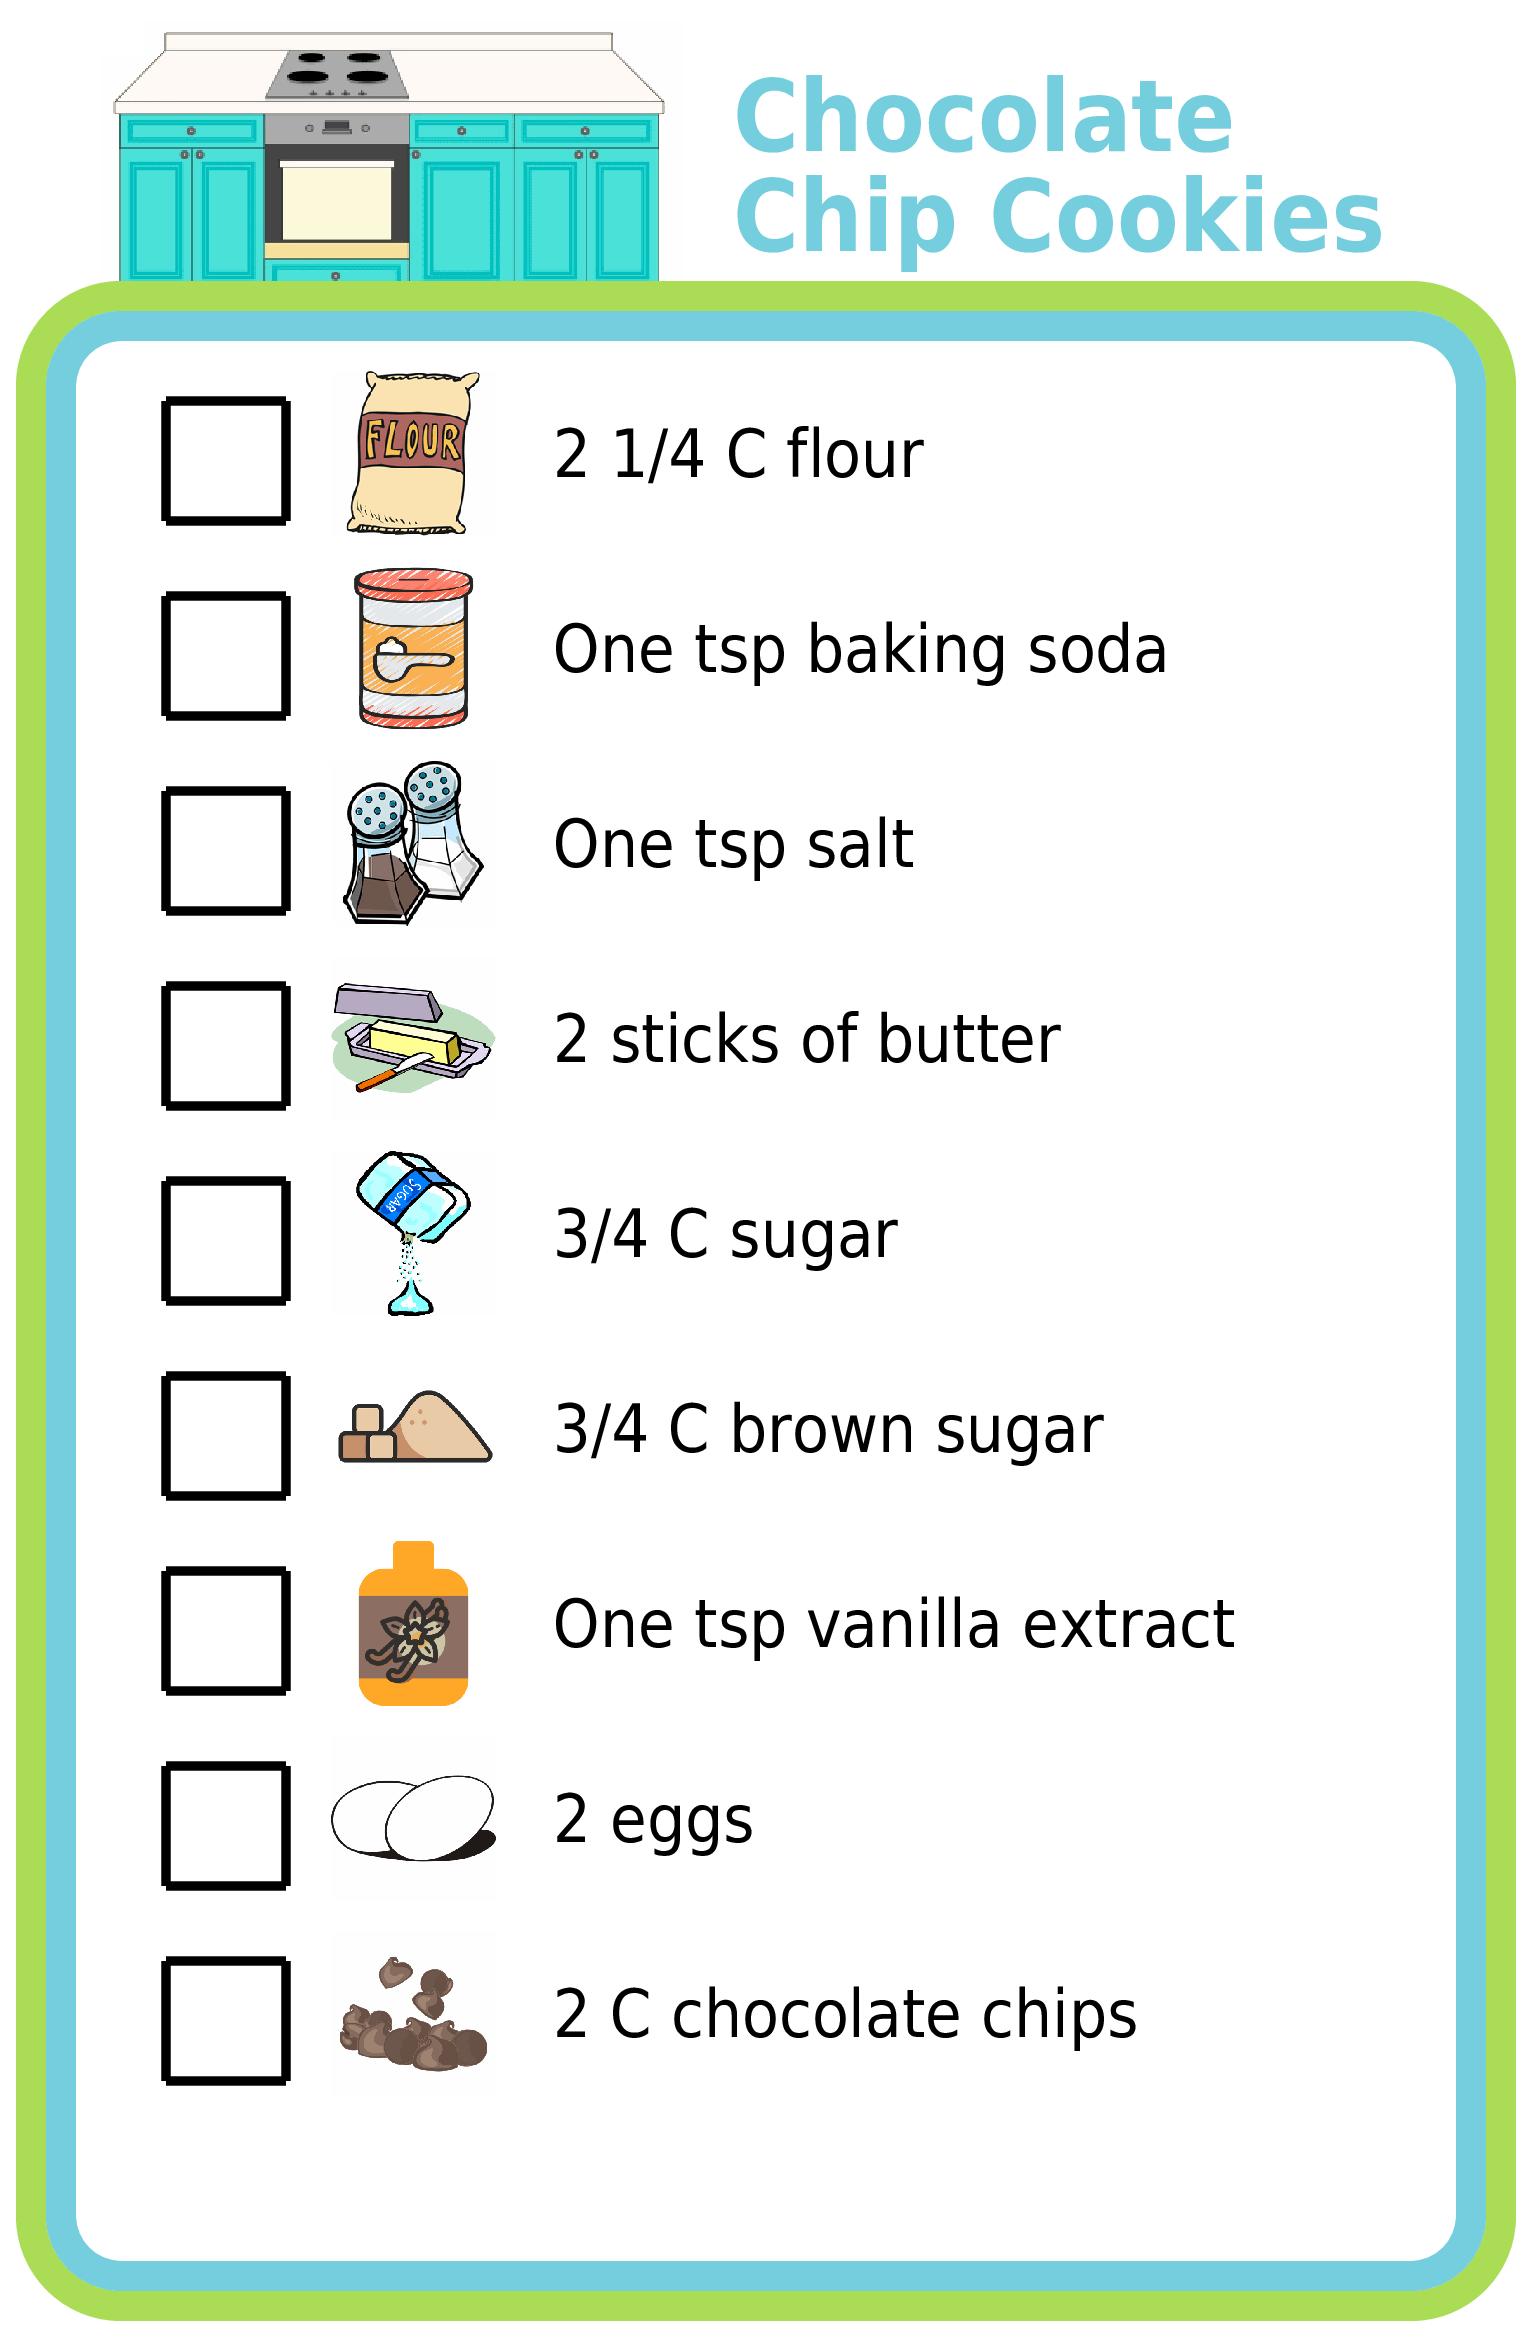 Picture checklist showing recipe for baking chocolate chip cookies